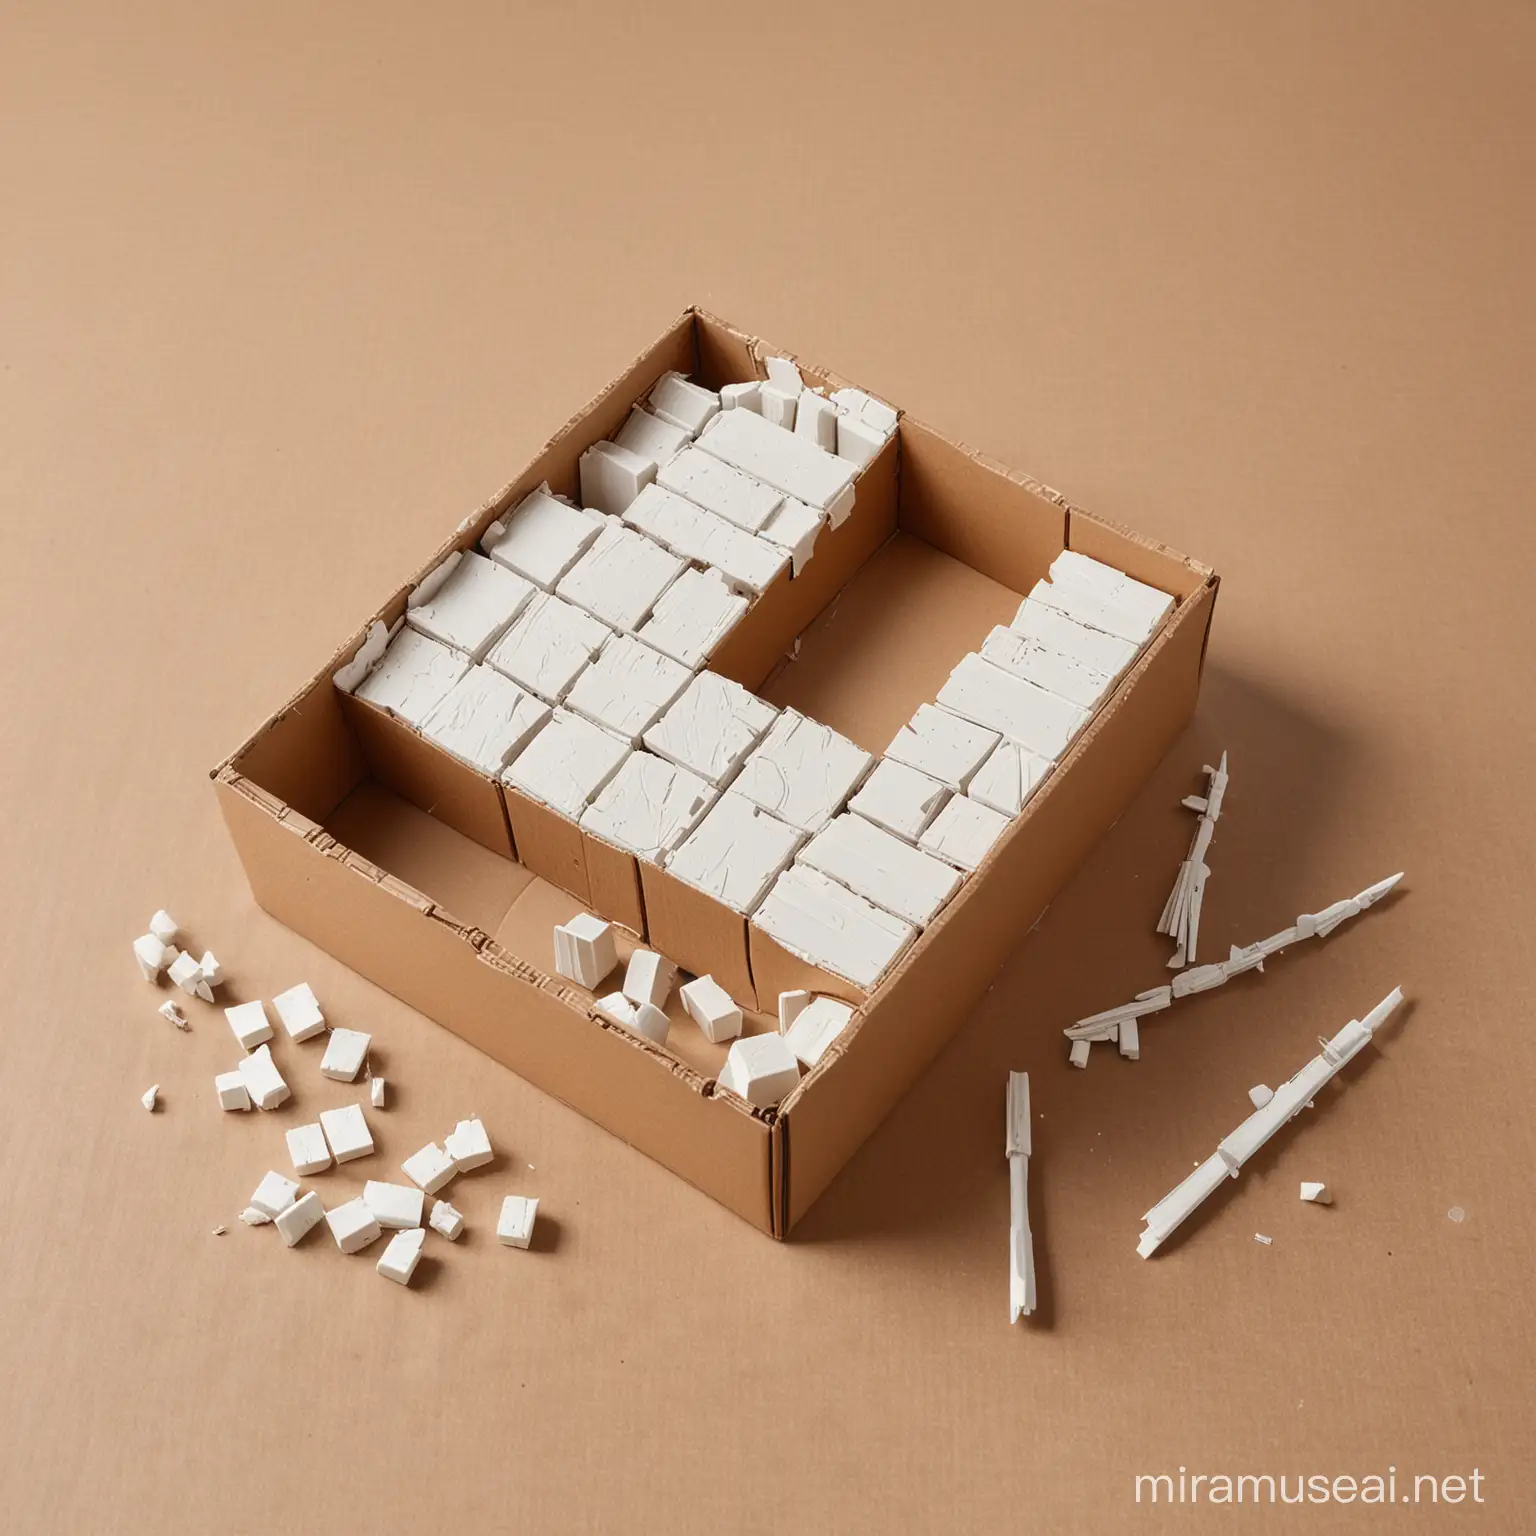 Creative Brick Building Kit for Kids Construct Your Imagination with Bricks and Brushes